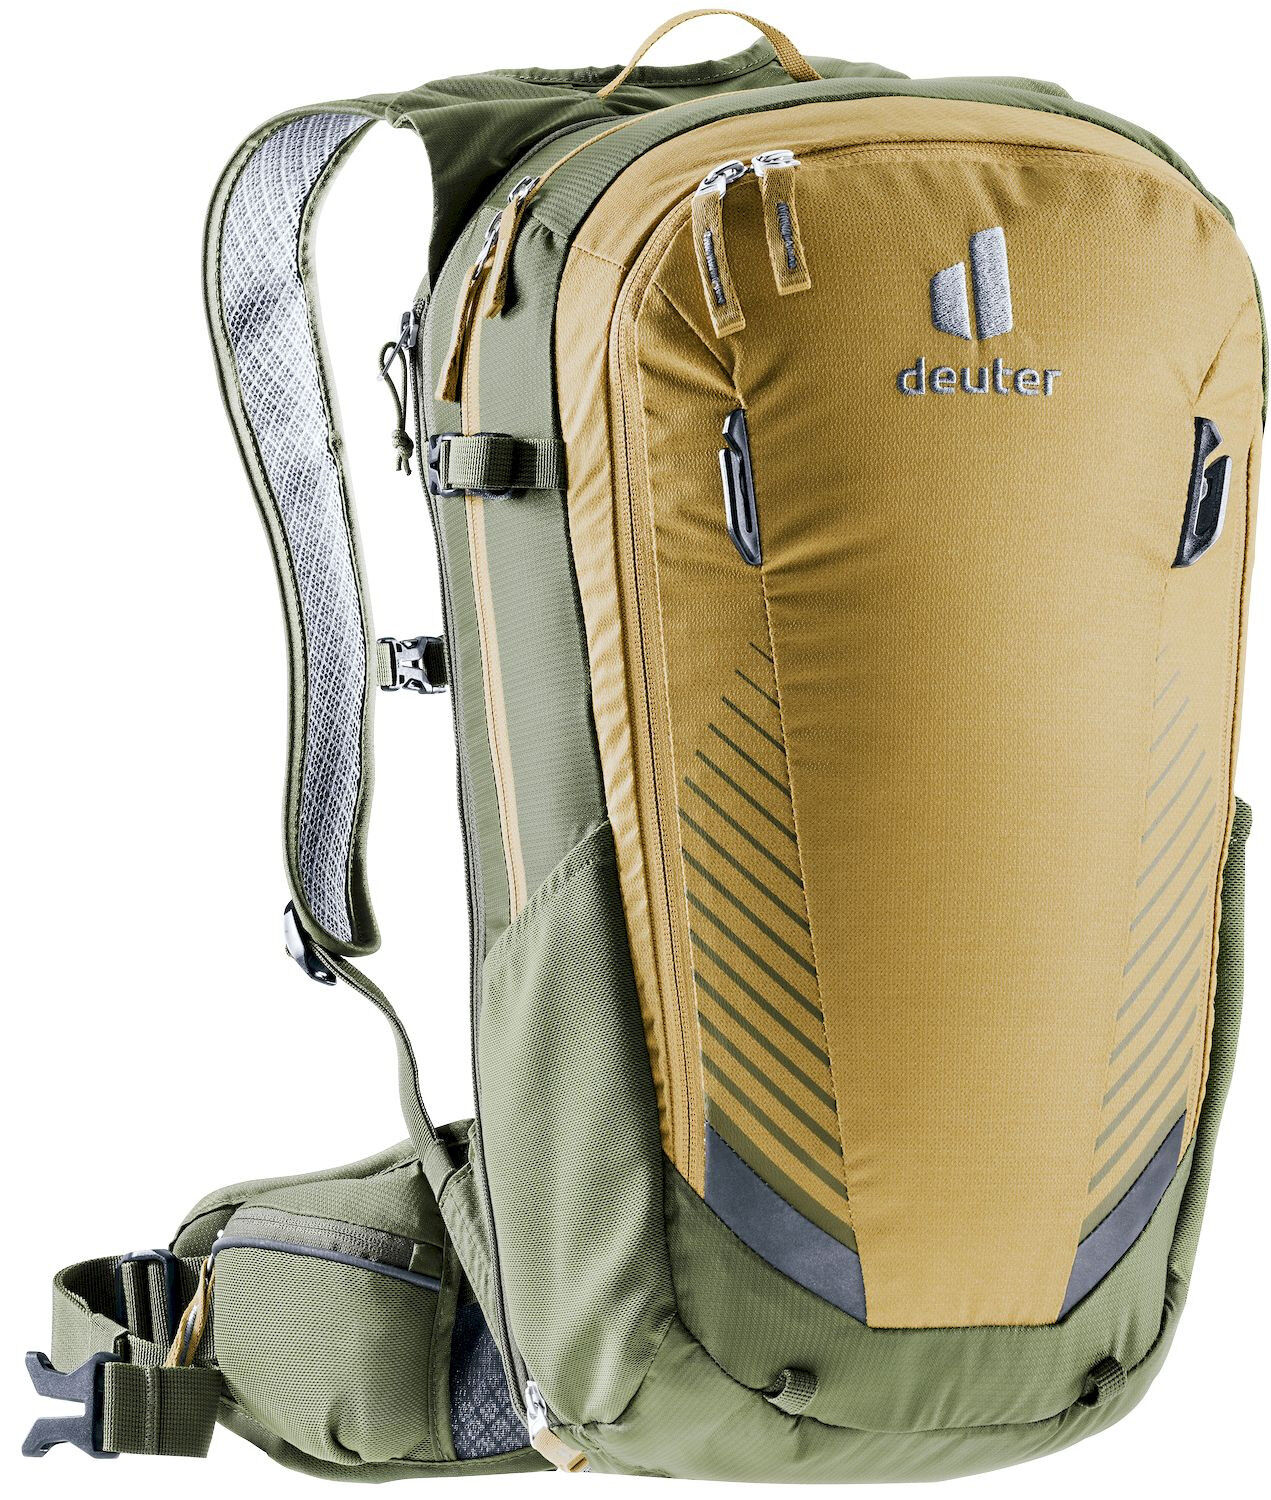 Deuter Compact EXP 14 - Cycling backpack - Men's